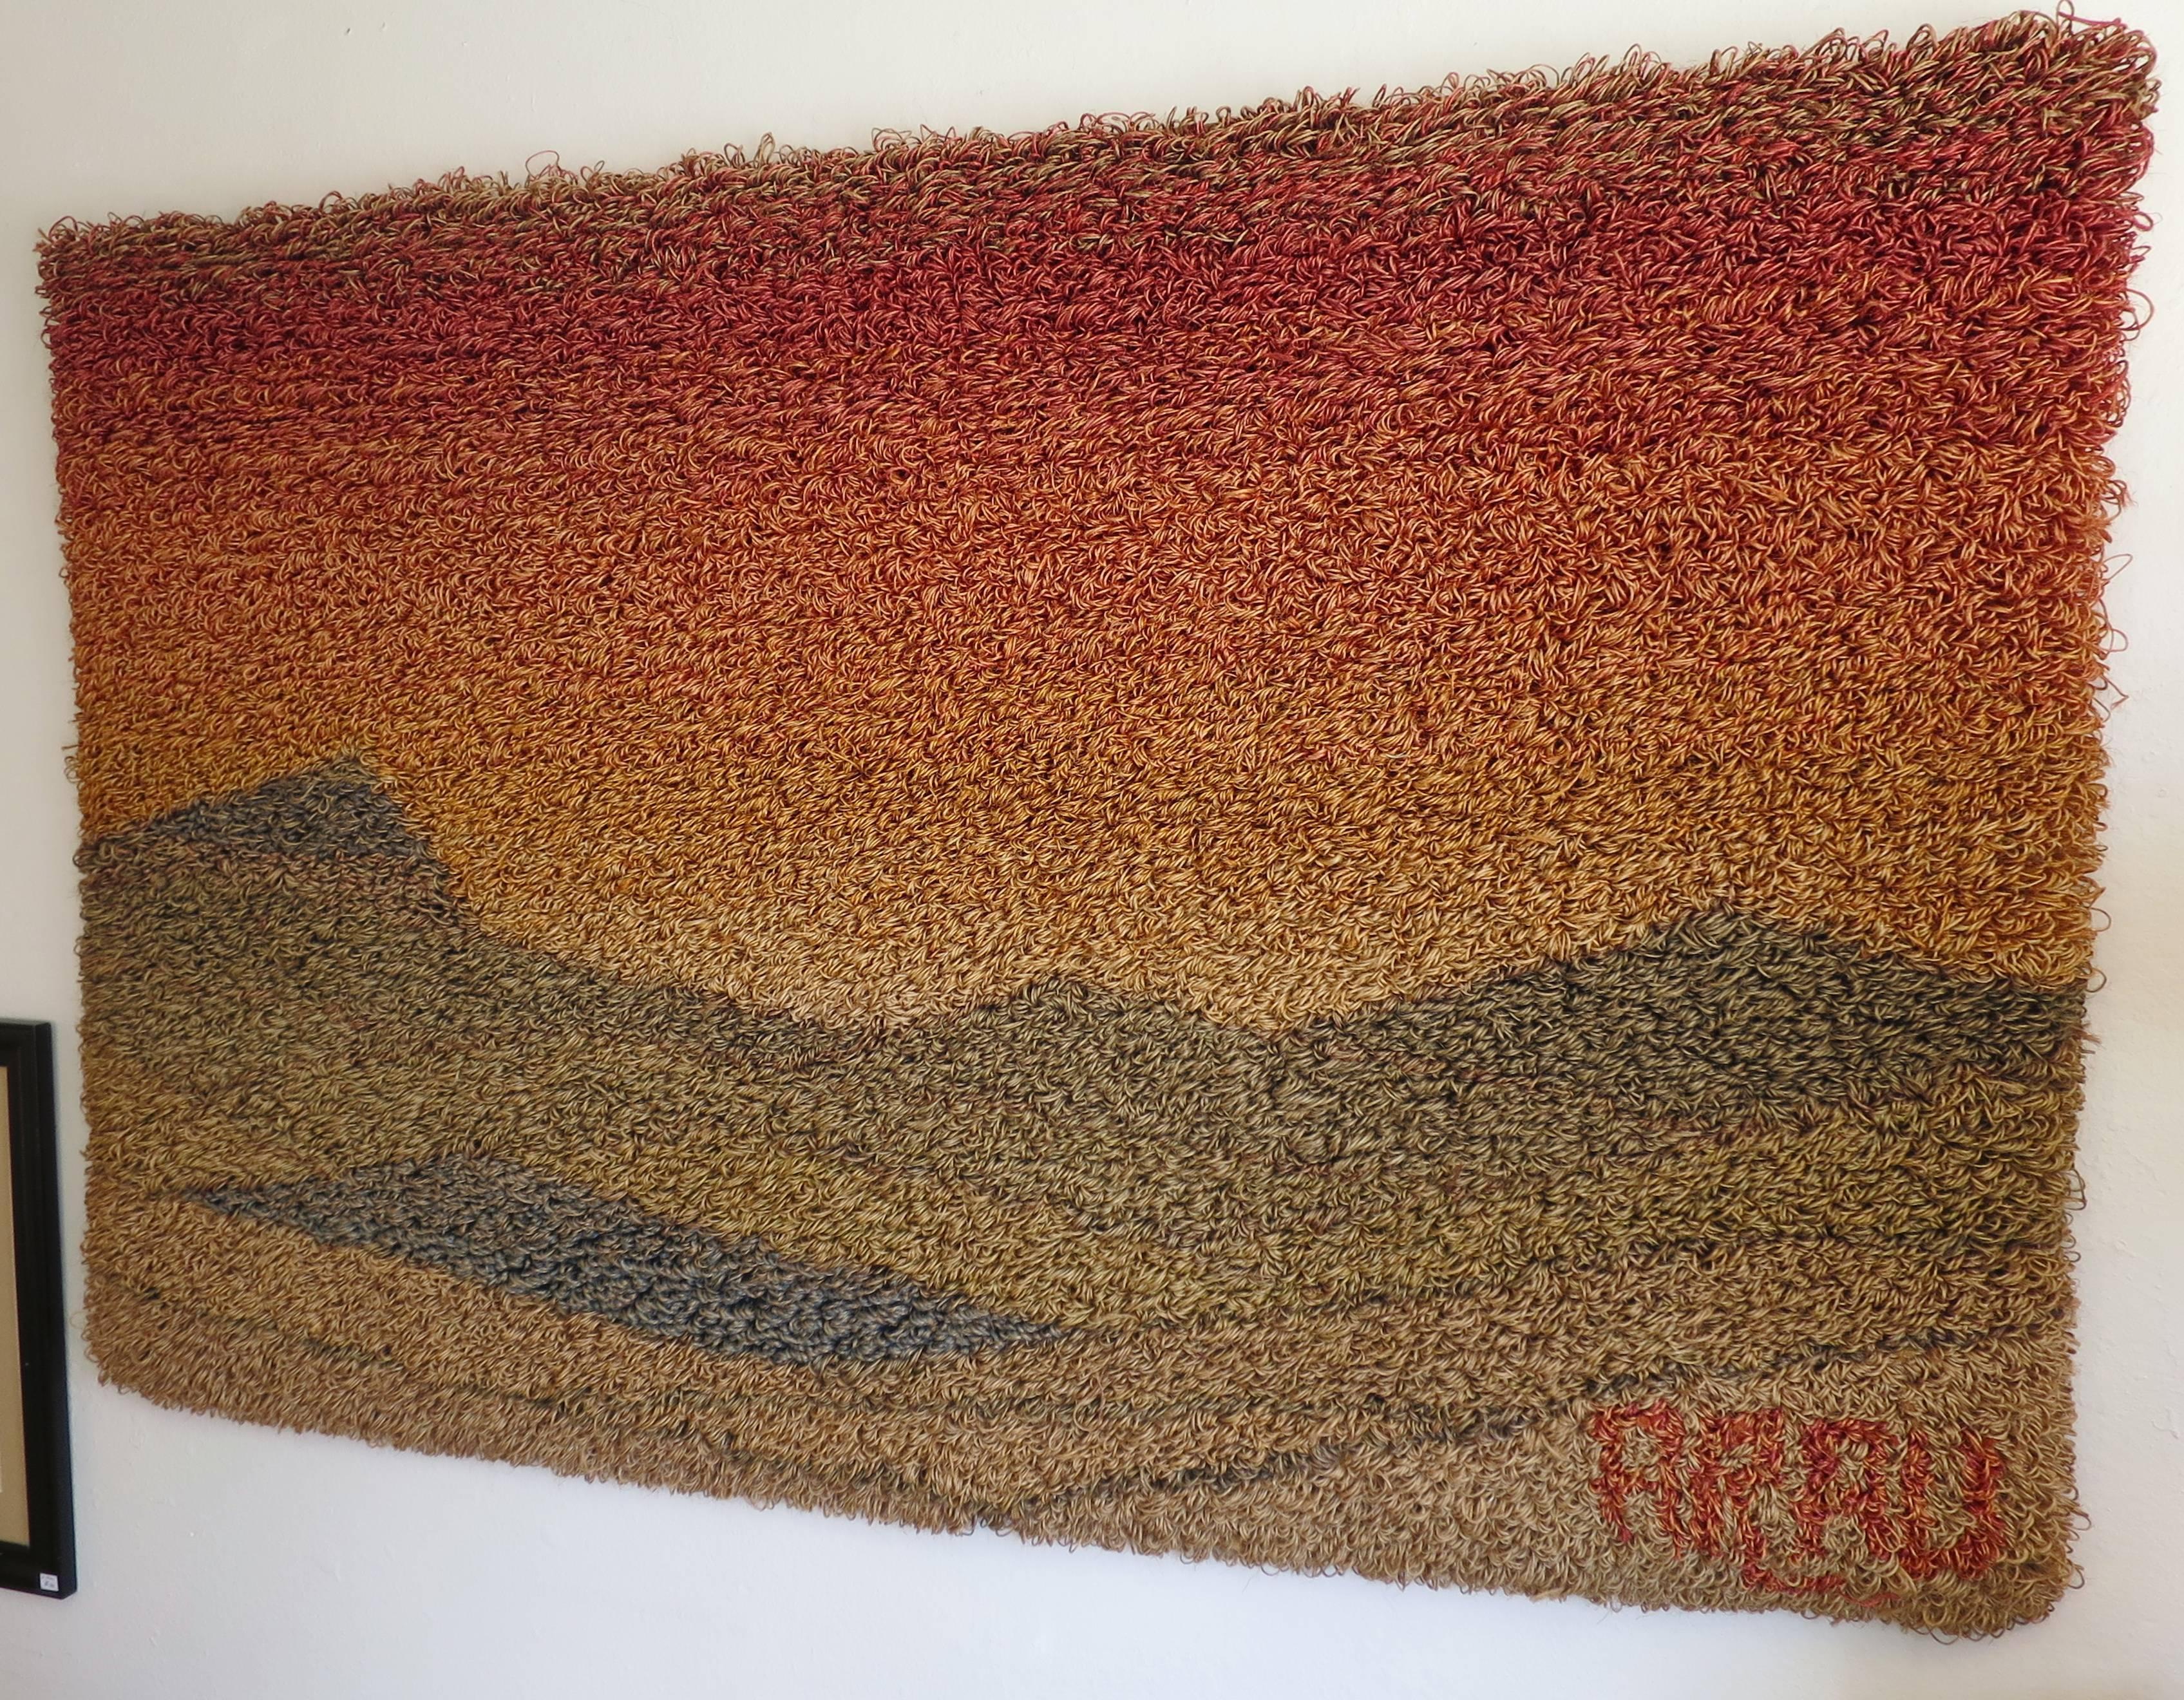 Large hooked burlap landscape wall hanging, circa 1970s. Dimensions: 68